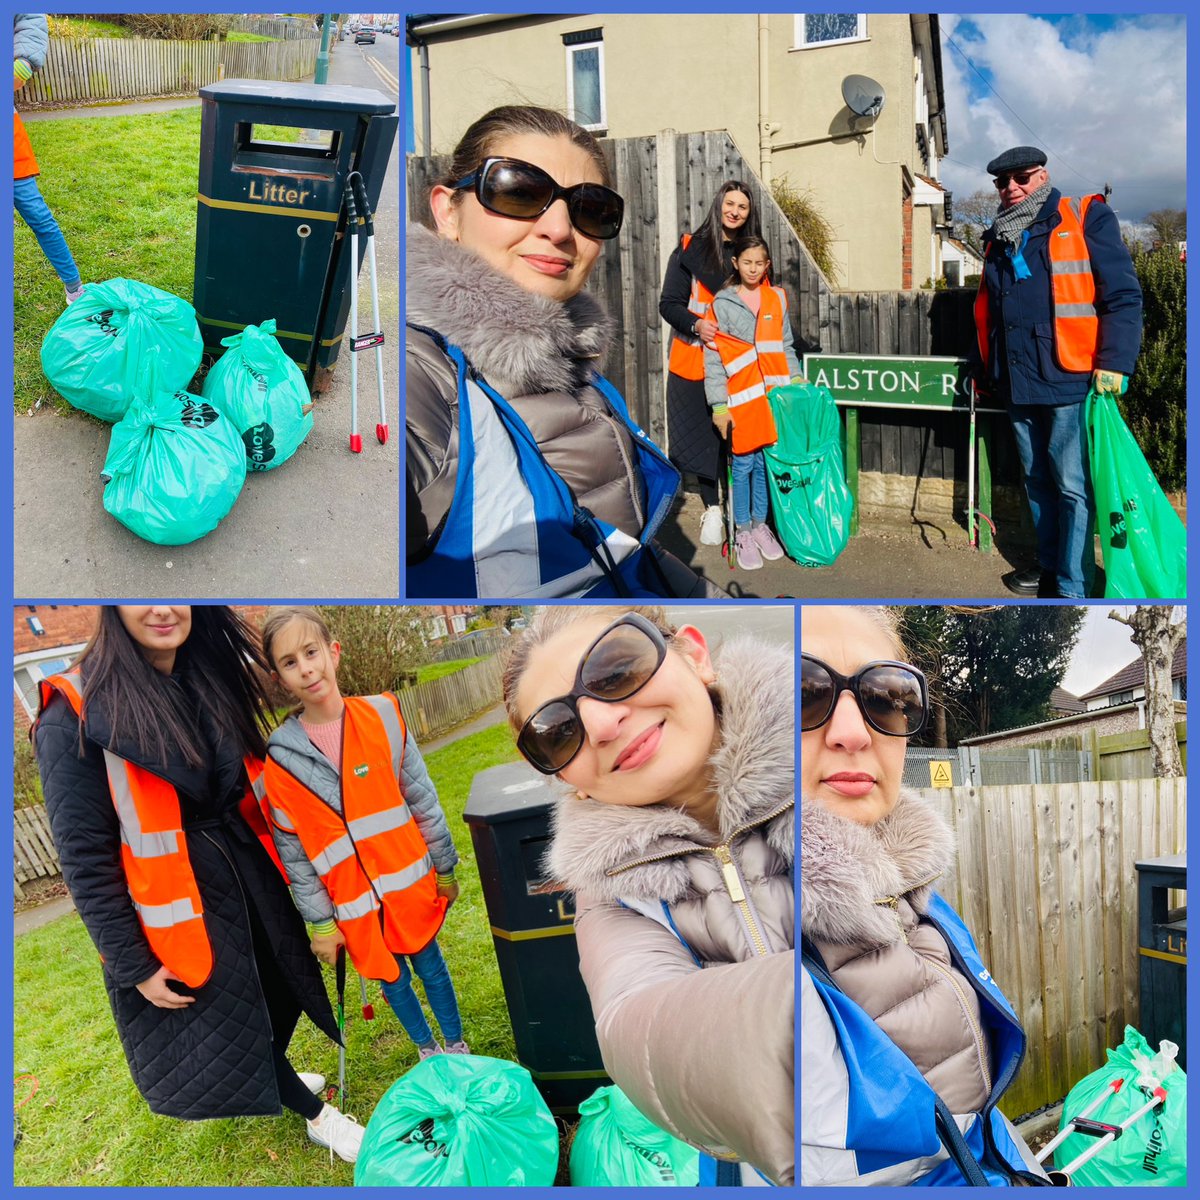 A sunny and cold Sunday morning in #Solihull litter picking around Silhill with Cllr Peter Hogarth MBE, and Natalia Balan @CWOwestmidlands @solboroughcons #loveyourcommunity #litterpick